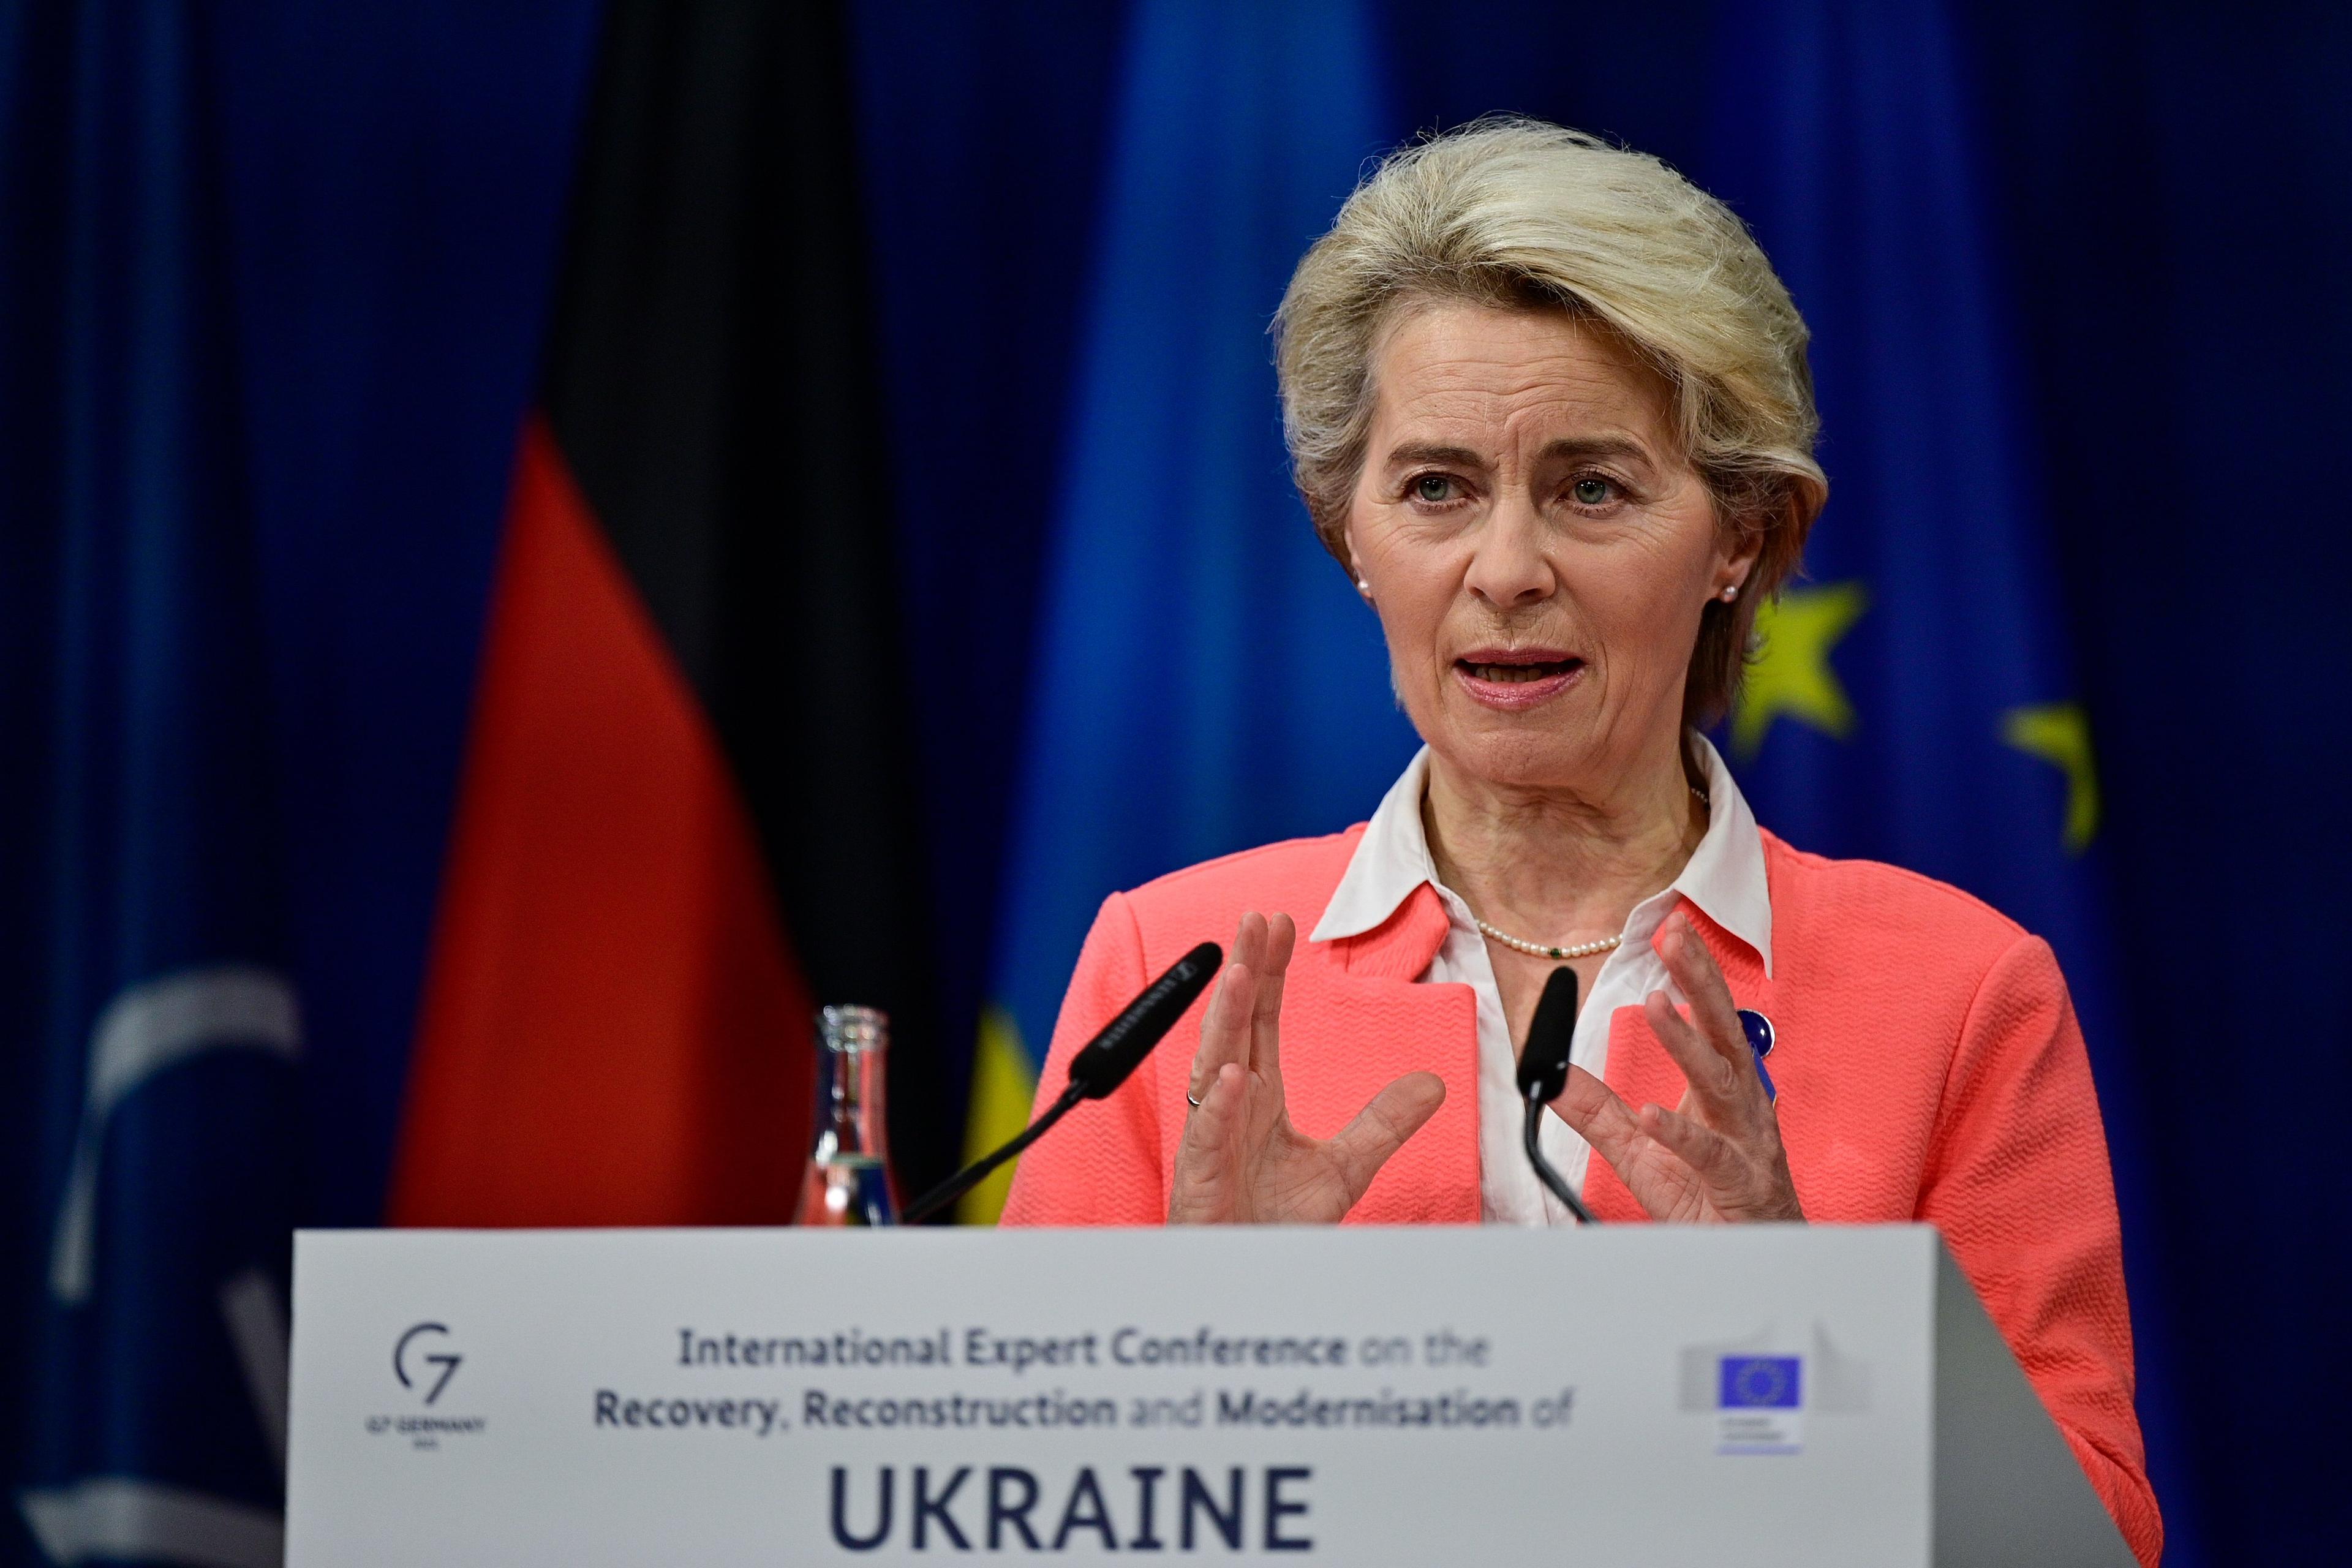 President of the European Commission Ursula von der Leyen addresses a press conference during the International Expert Conference on the Recovery, Reconstruction and Modernisation of Ukraine in Berlin on October 25, 2022. (Photo by John MACDOUGALL / AFP)